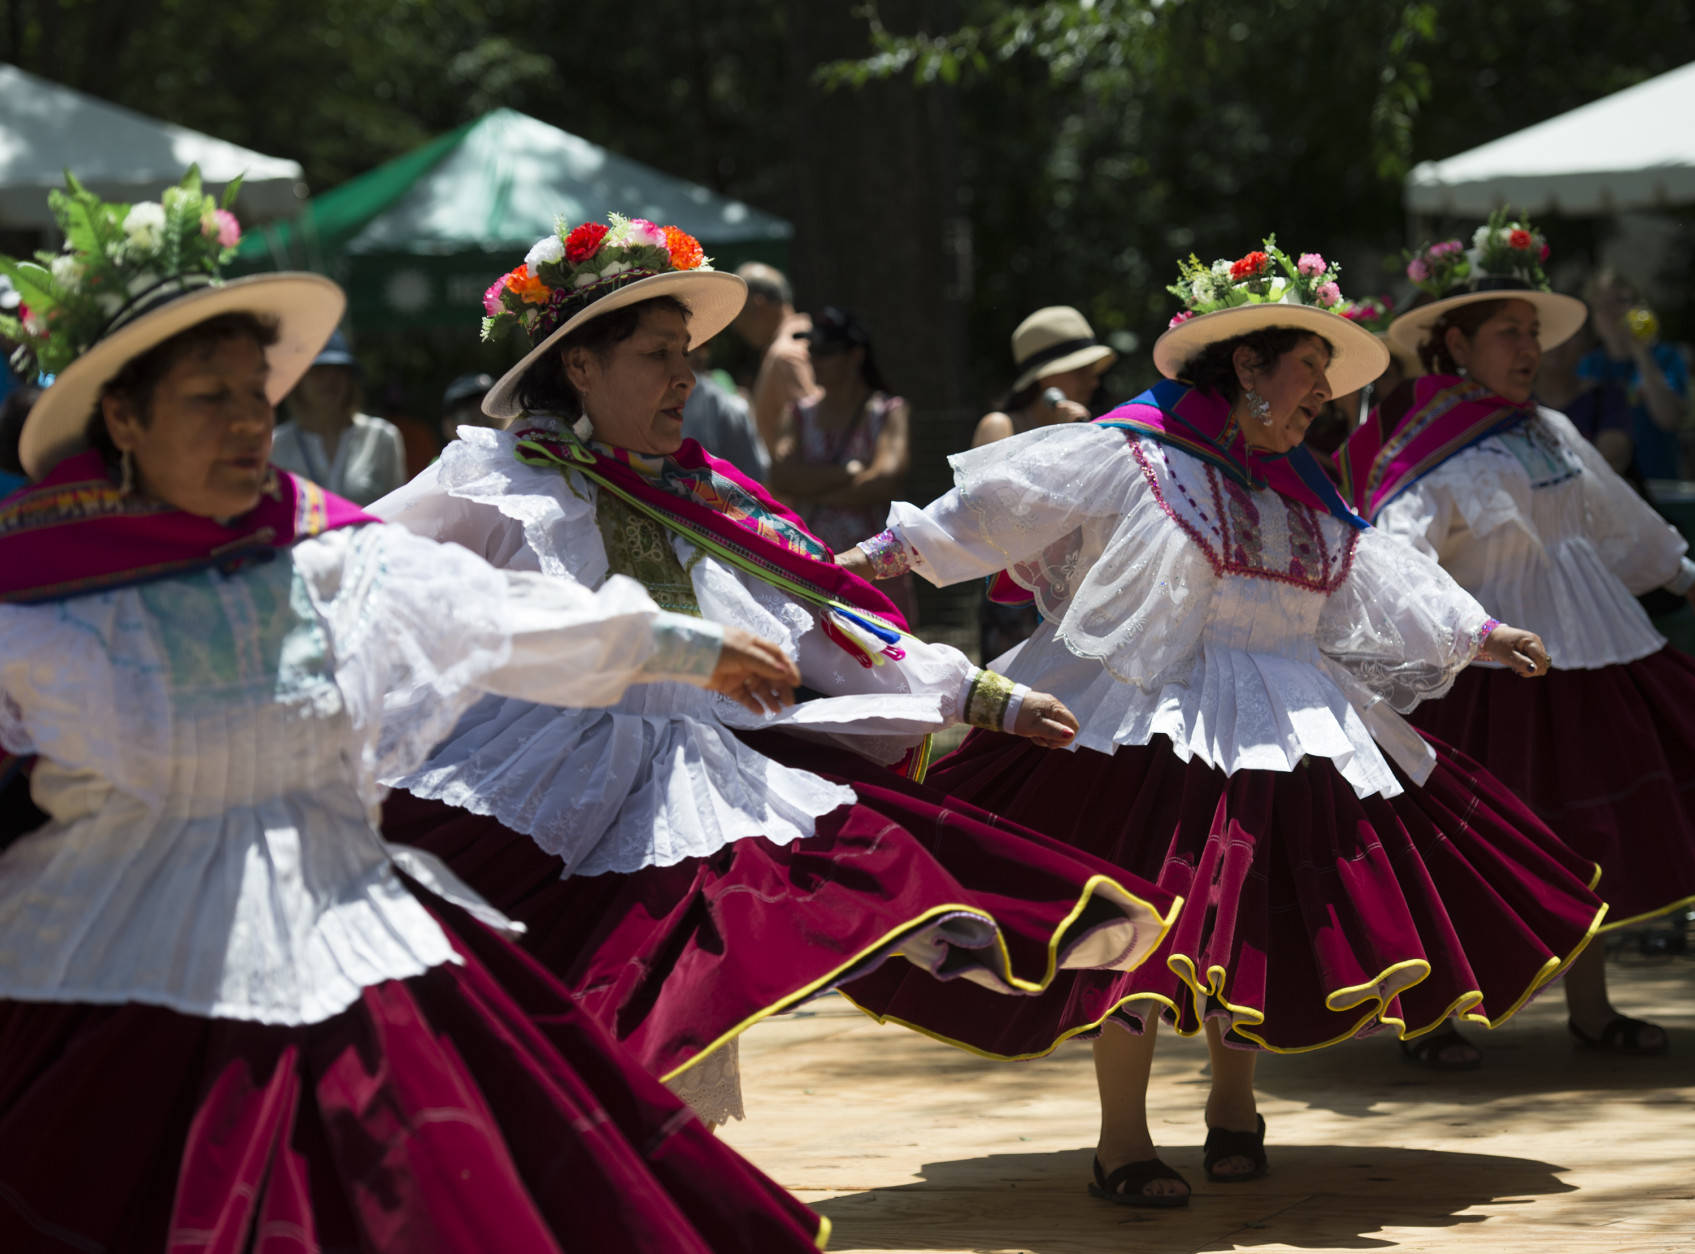 Peruvian dancers perform at the Smithsonian Folklife Festival in Washington, Wednesday, June 24, 2015. This years Smithsonian Folklife Festival focuses exclusively on Peru and its varied cultures, food and ecosystems. (AP Photo/Molly Riley)